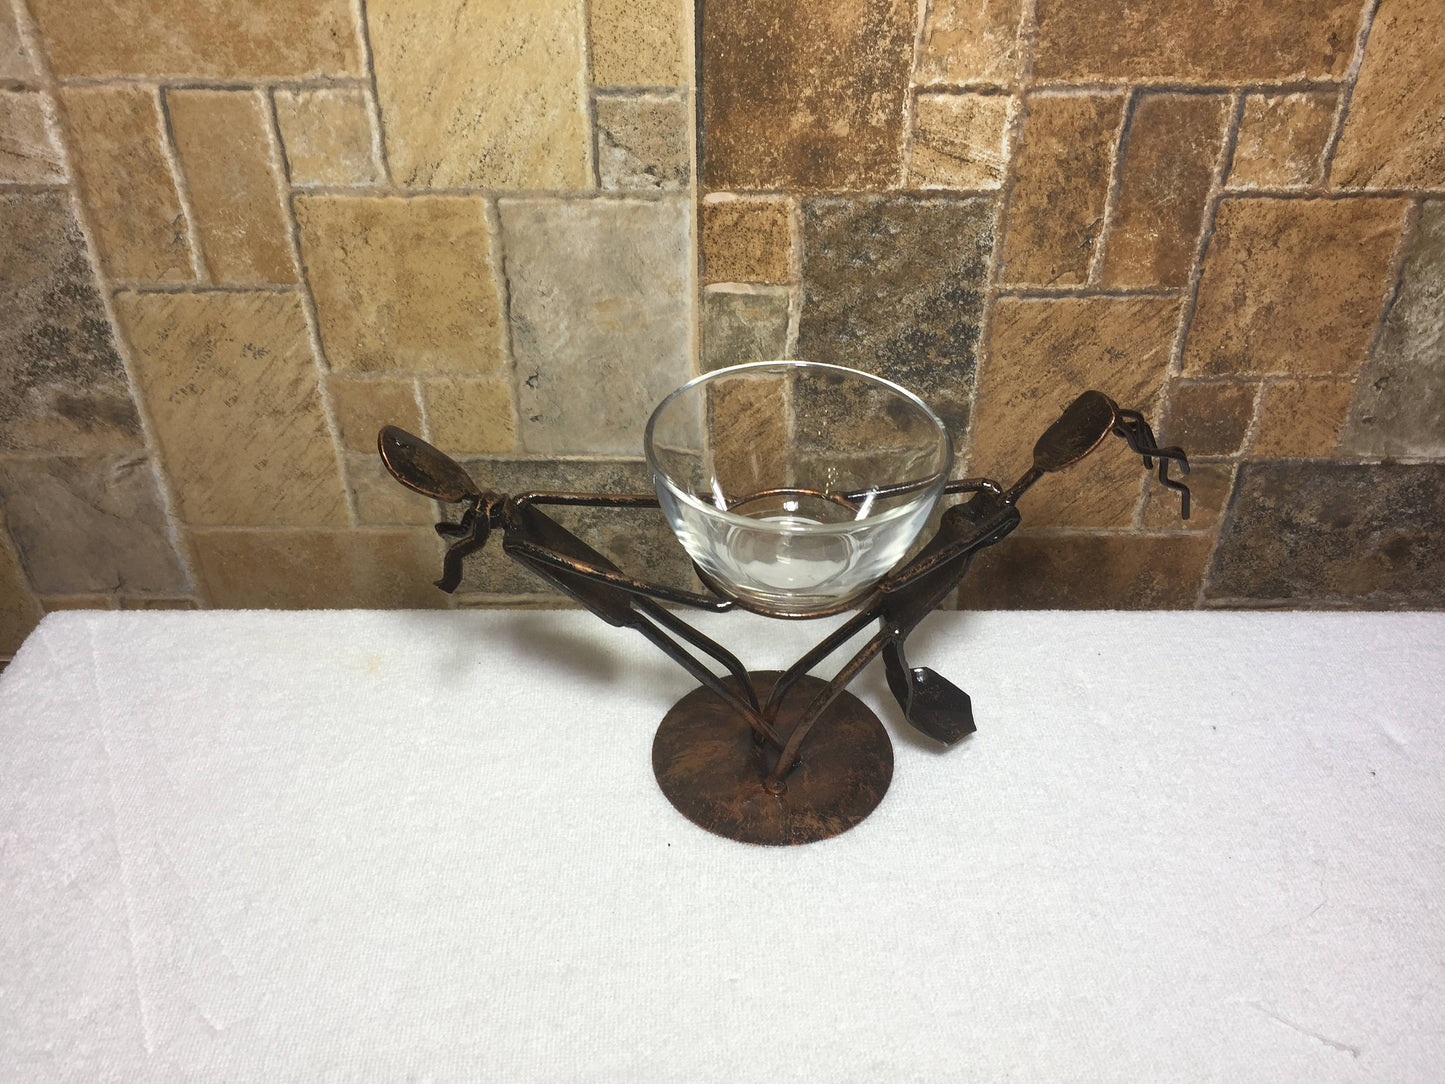 Hand forged candle holder, 6th anniversary gift, iron gift for her,steel anniversary gift for her,wedding anniversary gift for her,iron gift